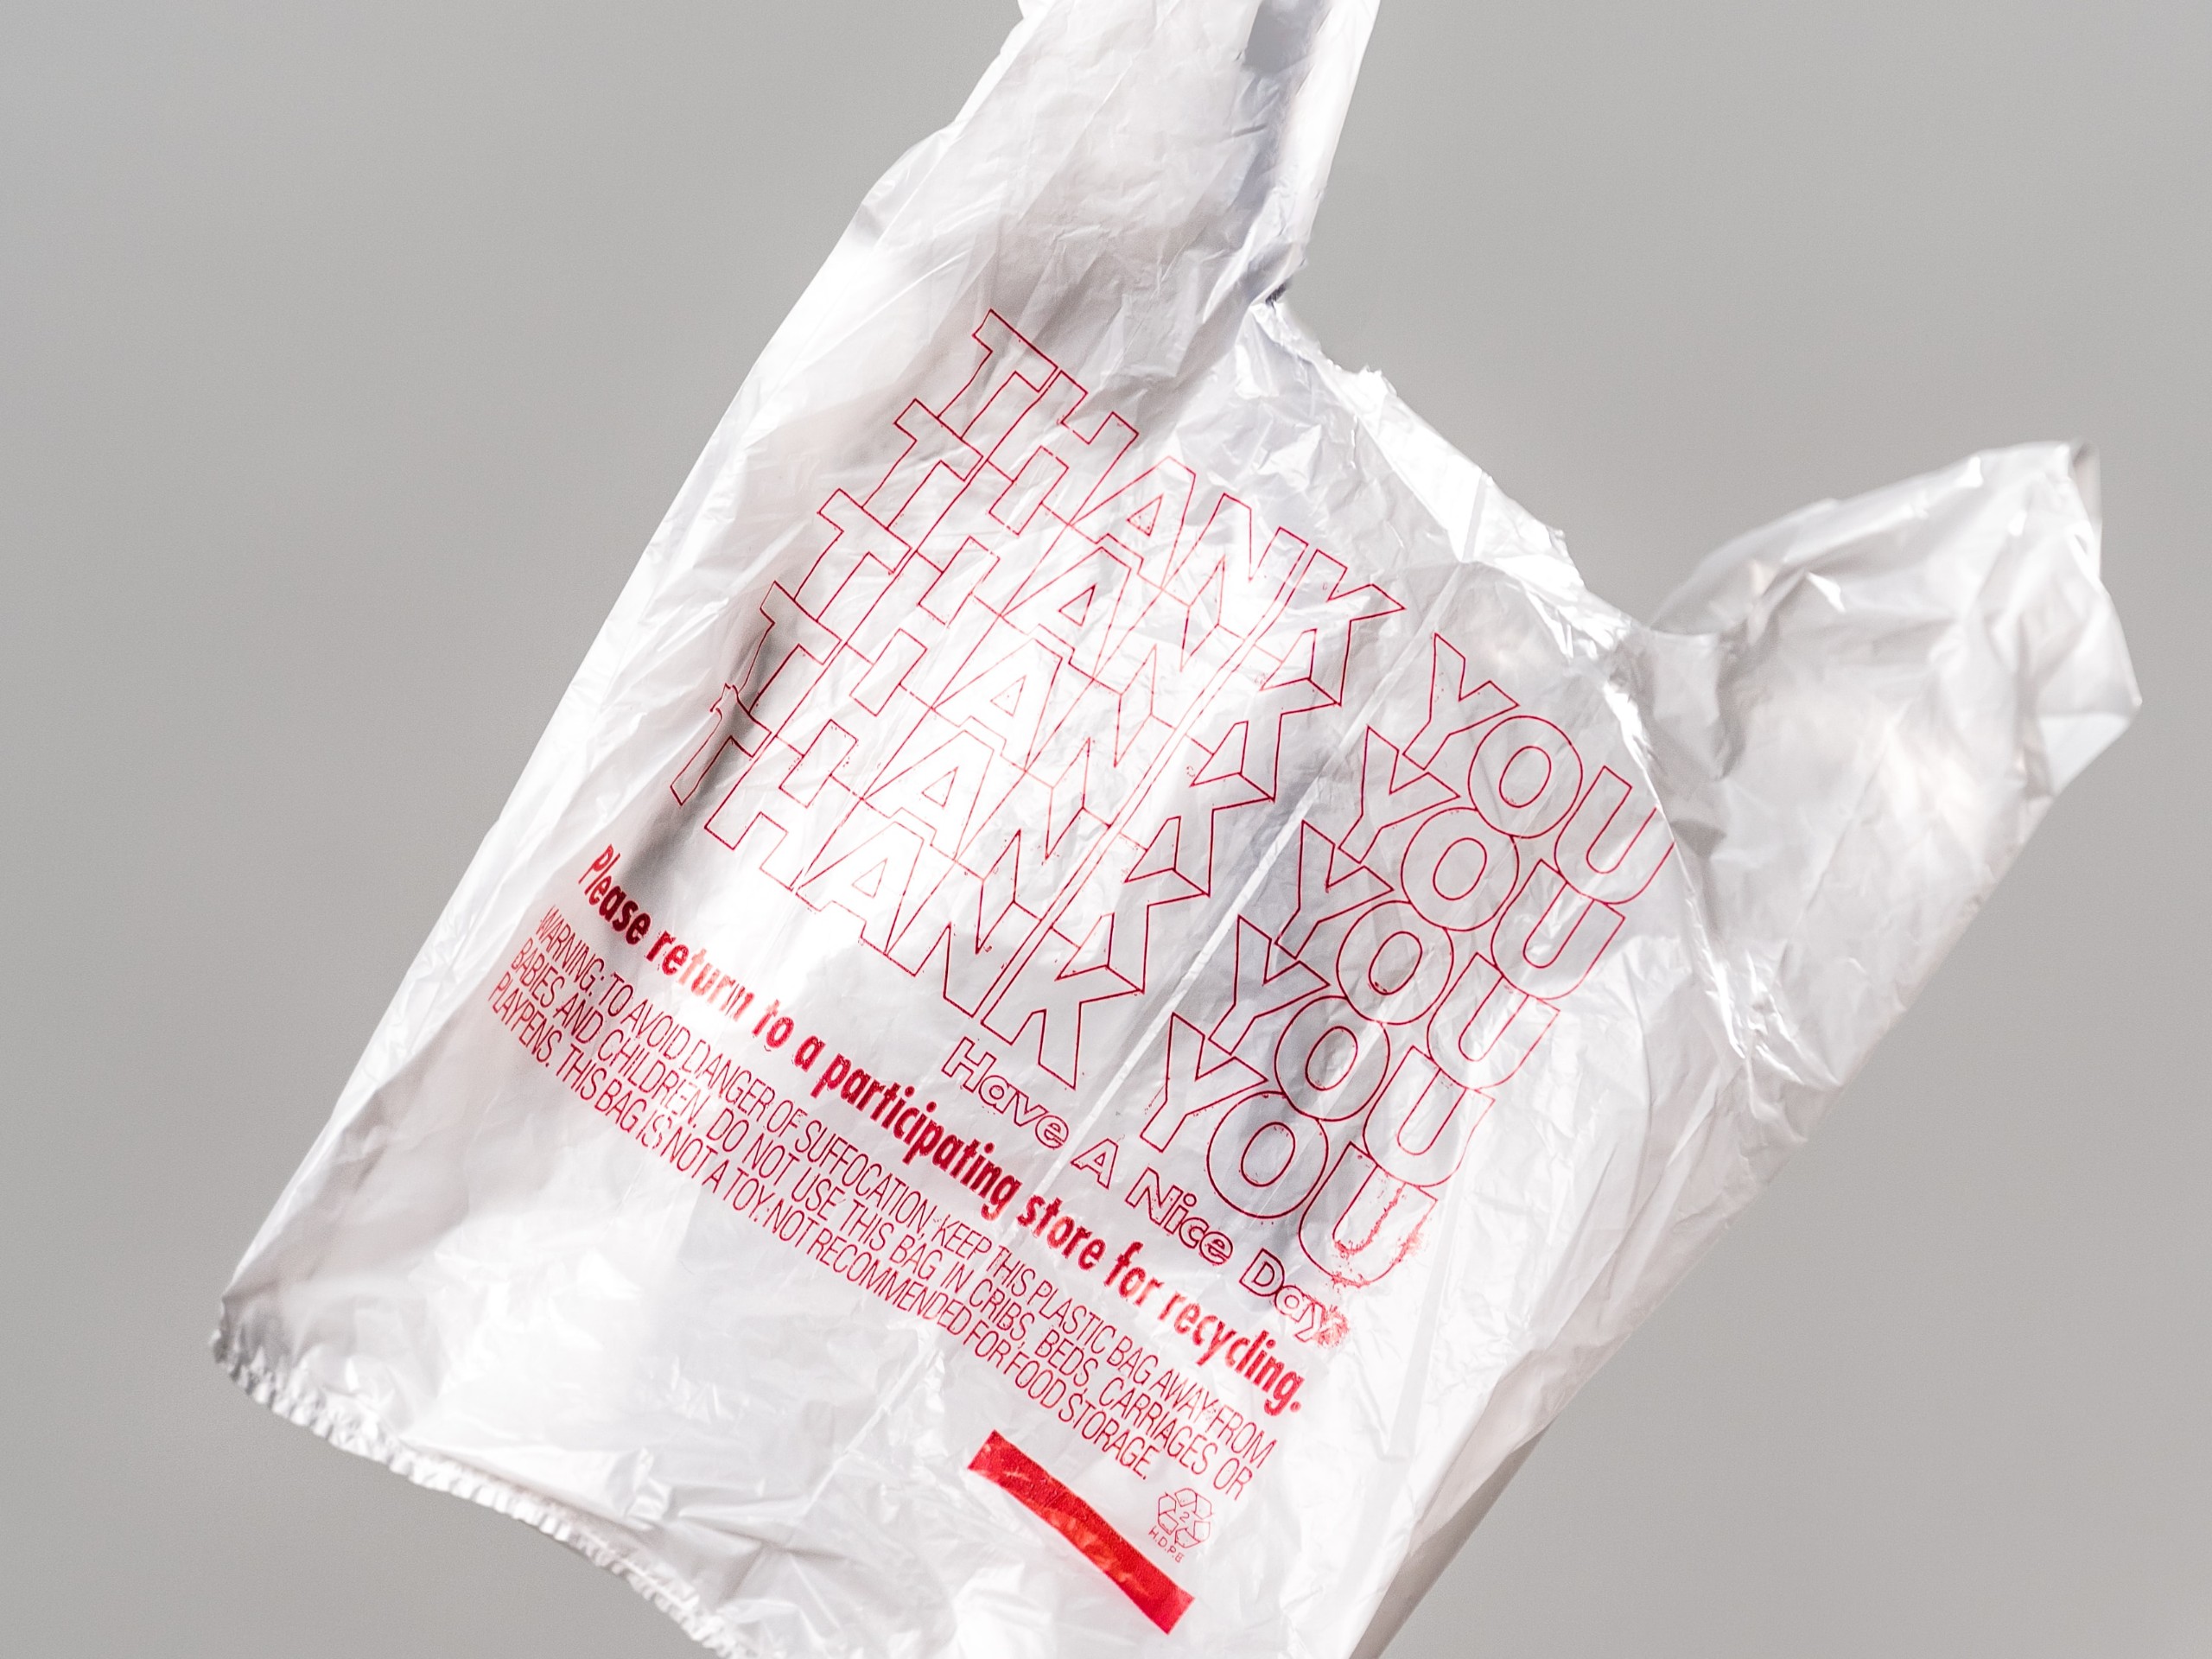 5 Recycling Plastic Bag Innovations Changing the World